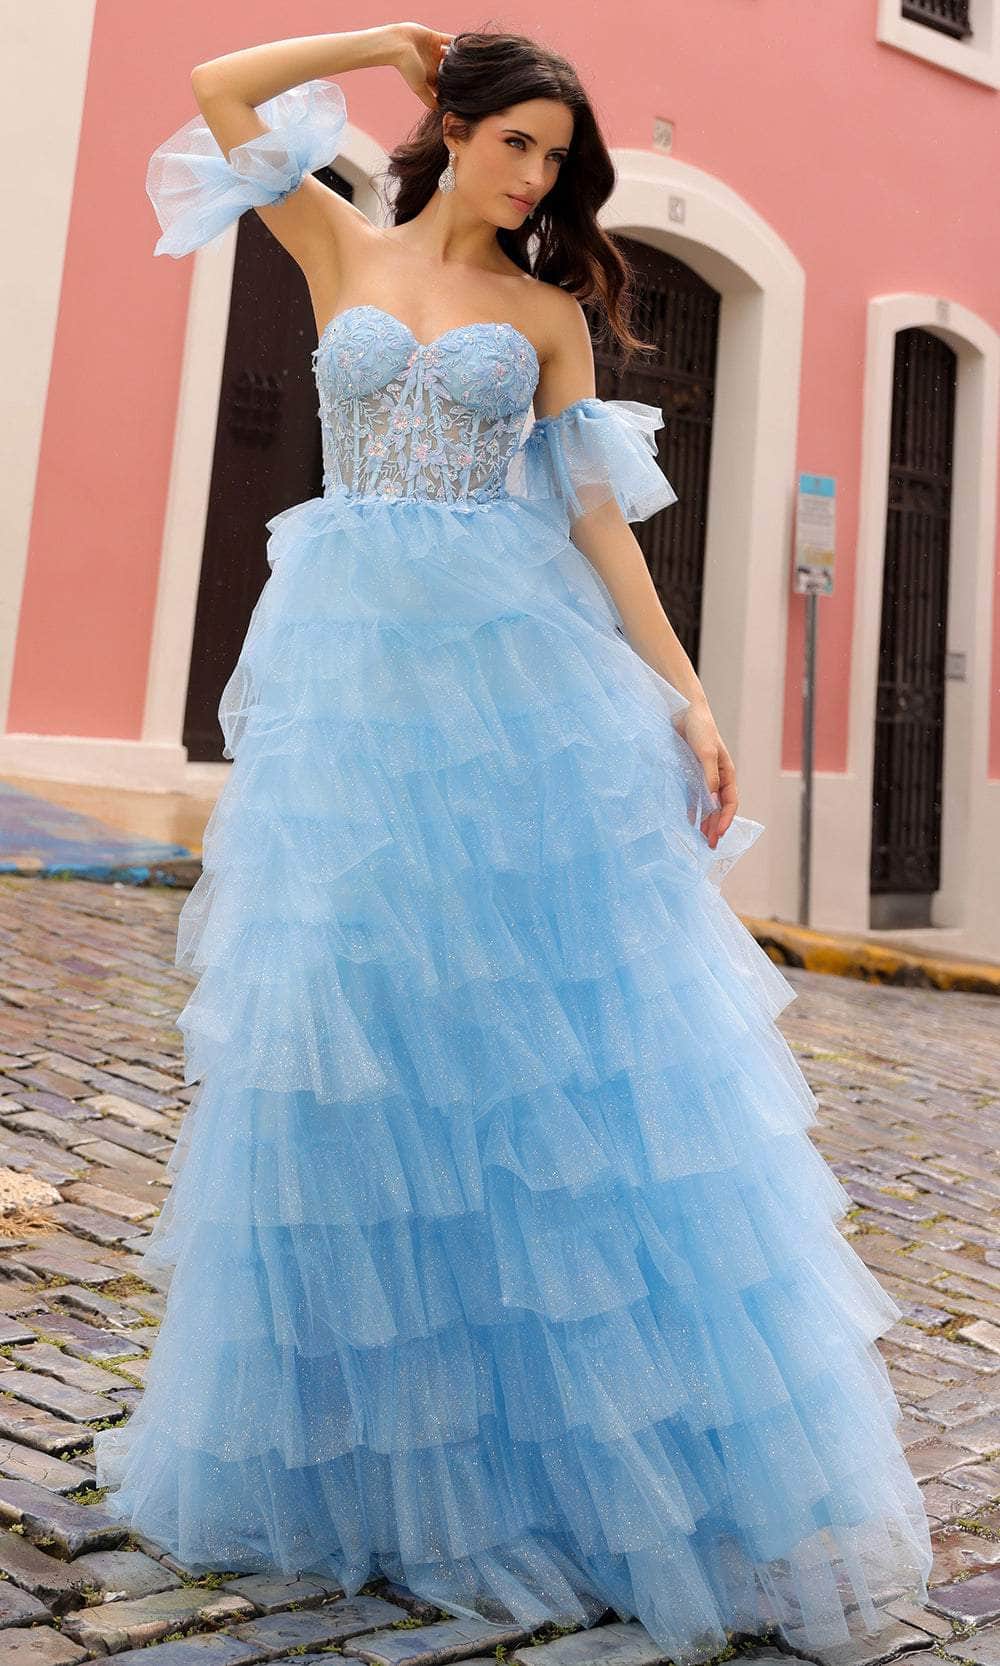 Nox Anabel T1338 - Strapless Ruffled Prom Dress Special Occasion Dresses 